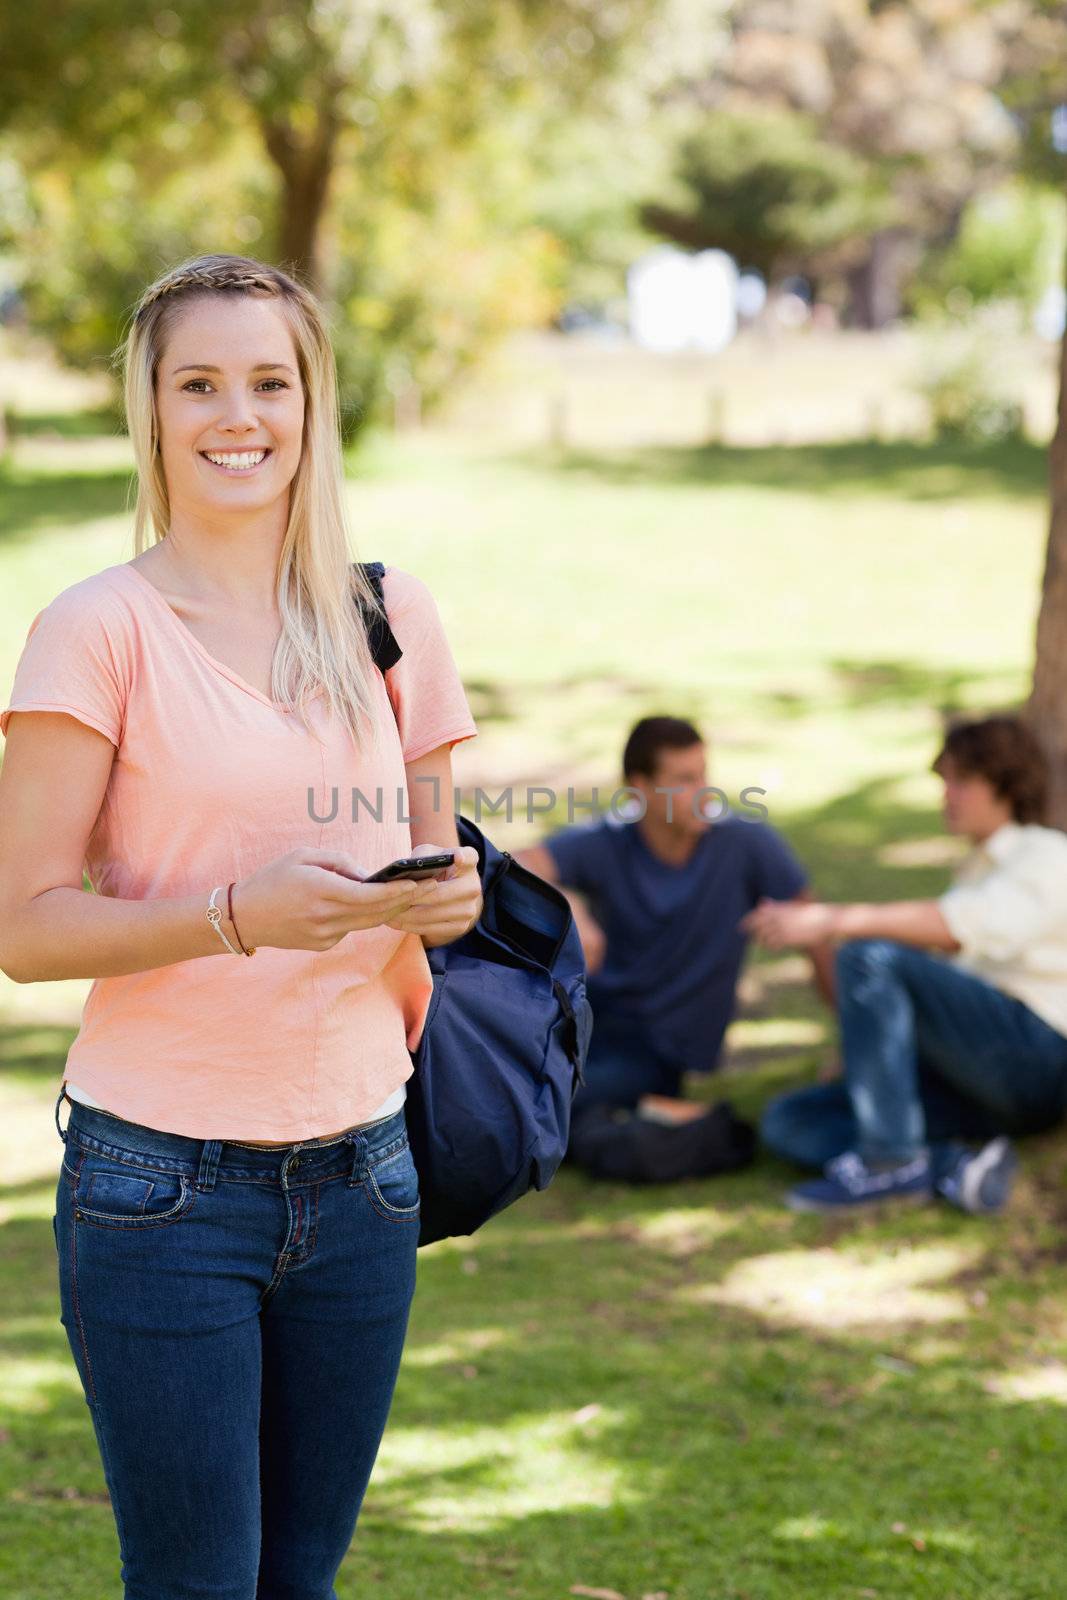 Portrait of a happy girl using a smartphone in a park with friends in background